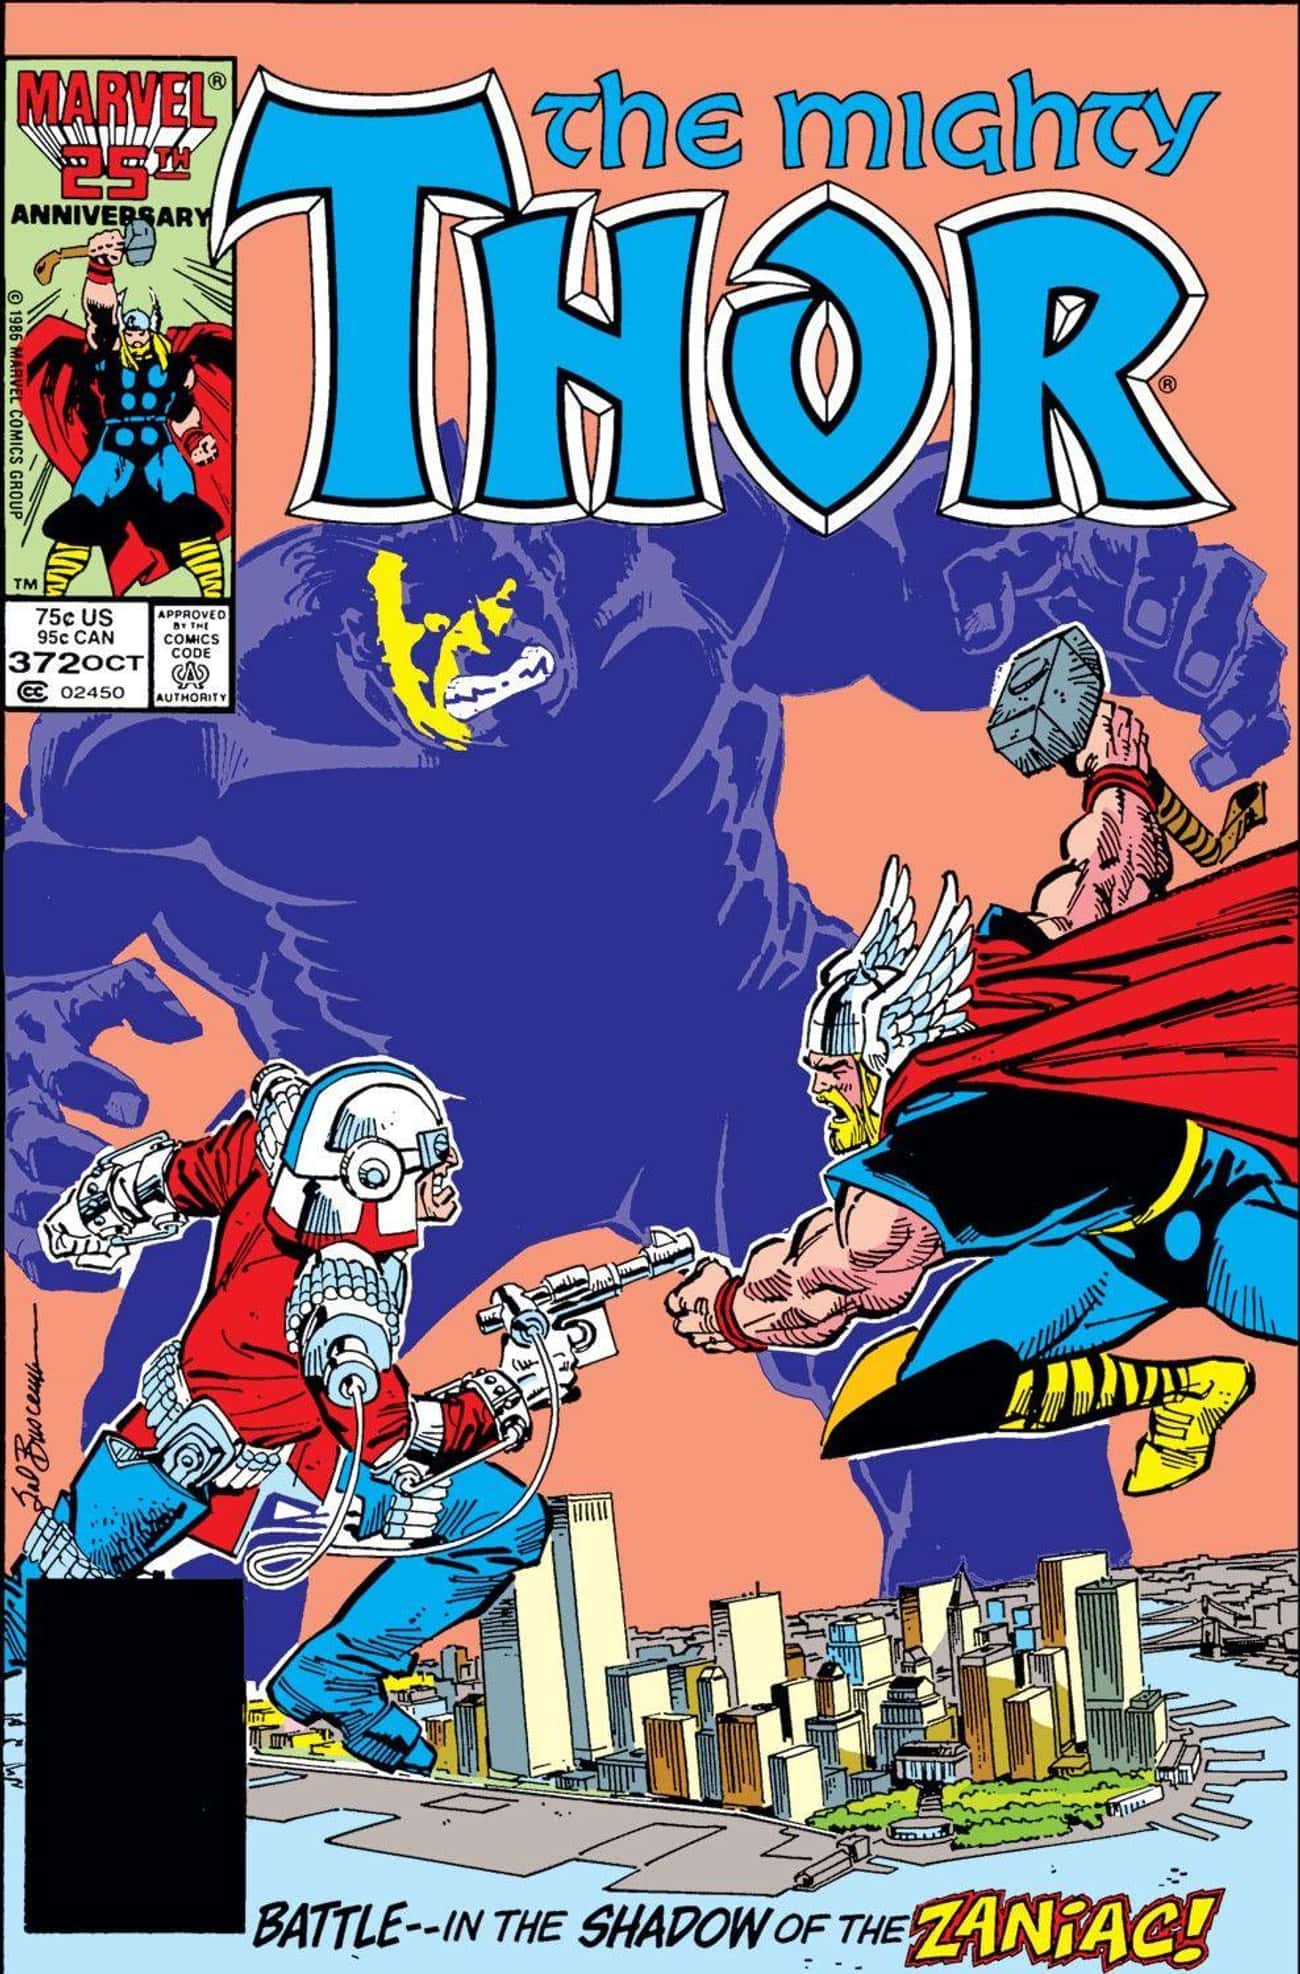 The Time Variance Authority Made Their Debut In A Comic Starring Thor Back In 1986